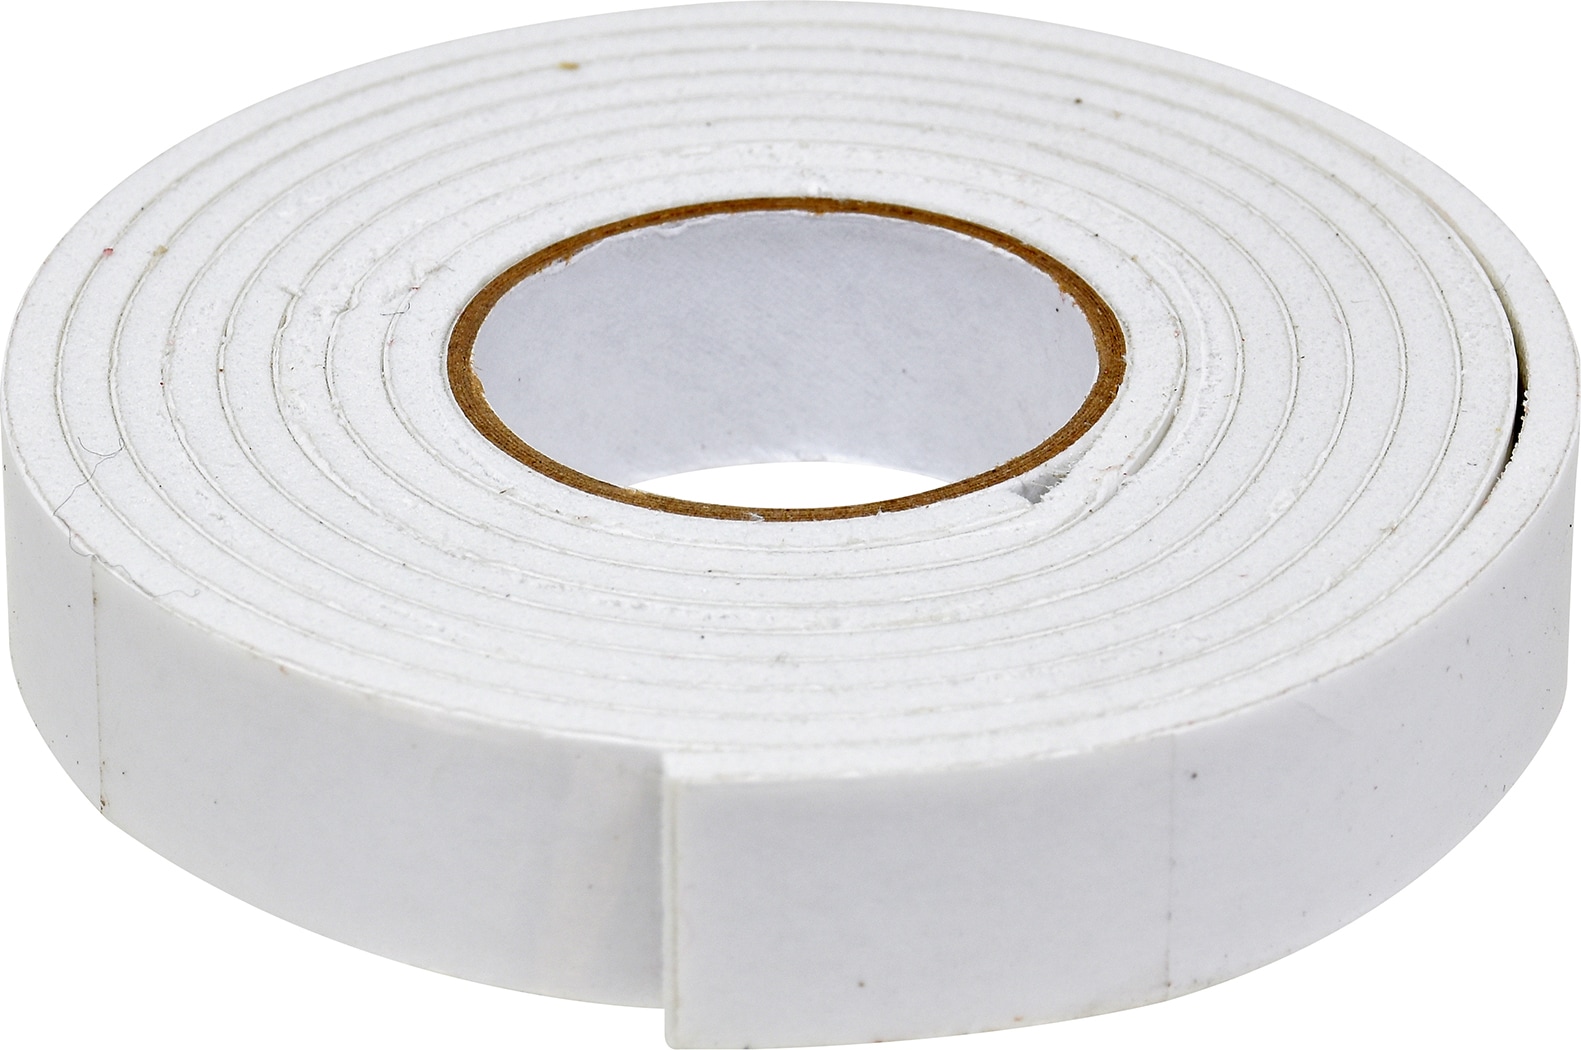 OOK 1/2 x 42-inch Double Sided Tape - 1pc